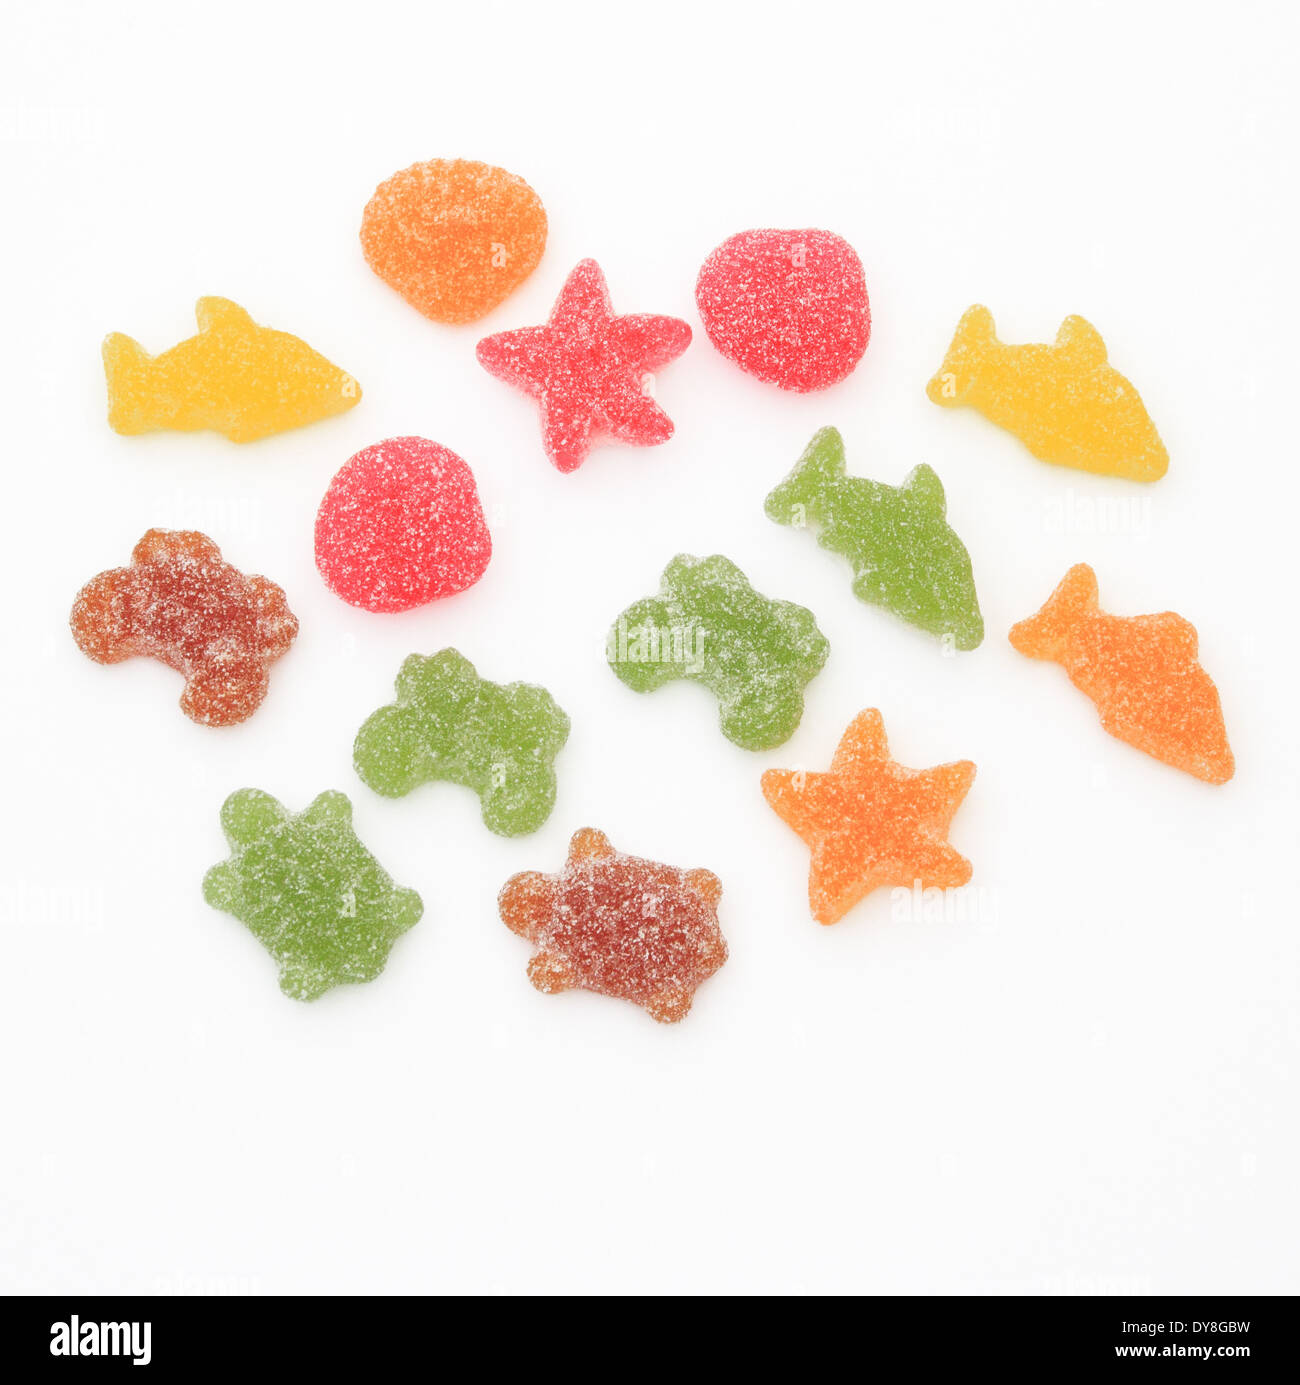 Haribo Fizzy Sea World Sweets on a White Background Stock Photo